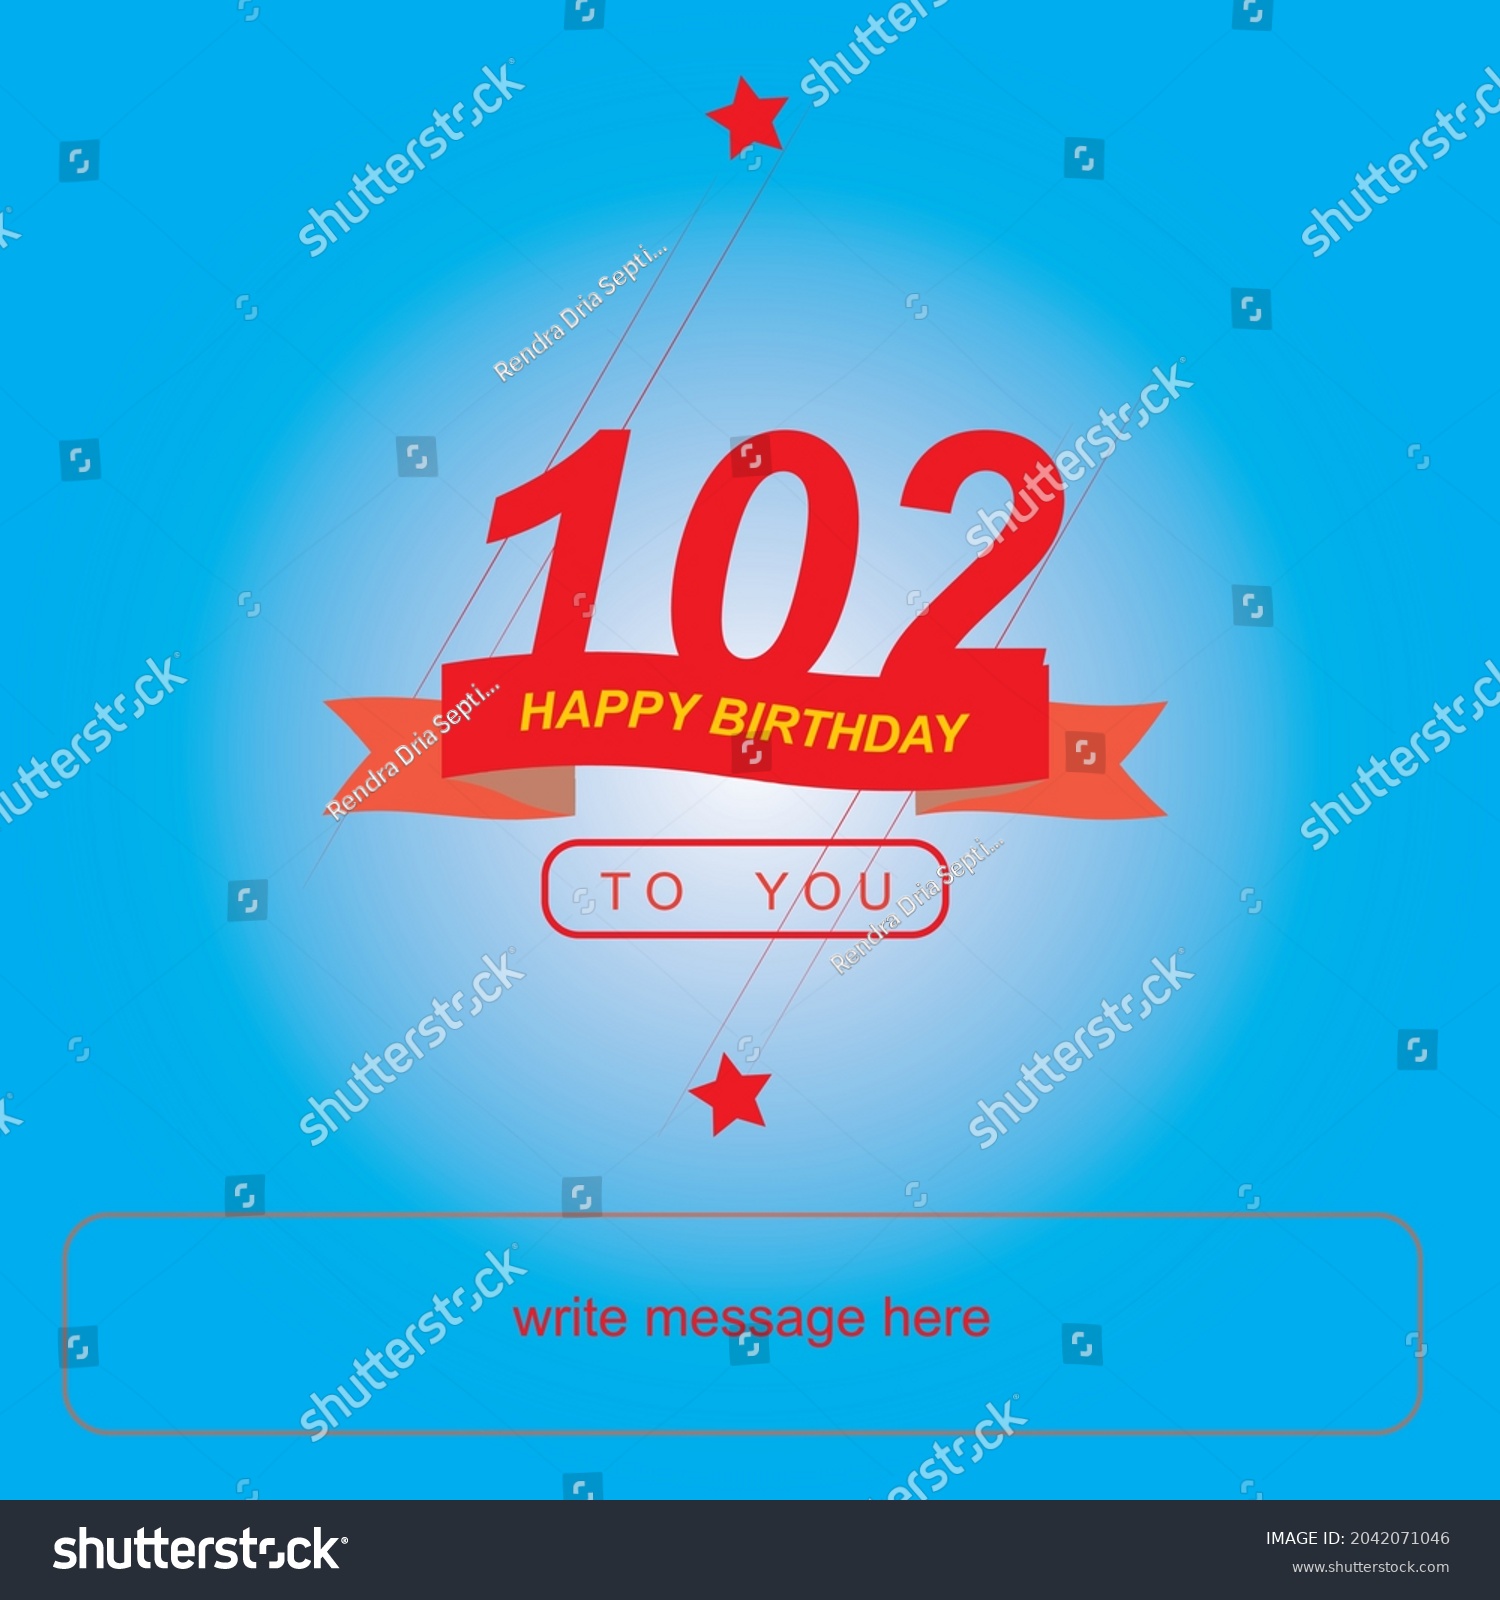 SVG of 102 years birthday, happy birthday banner with star shape and red ribbon. very nice vector design svg